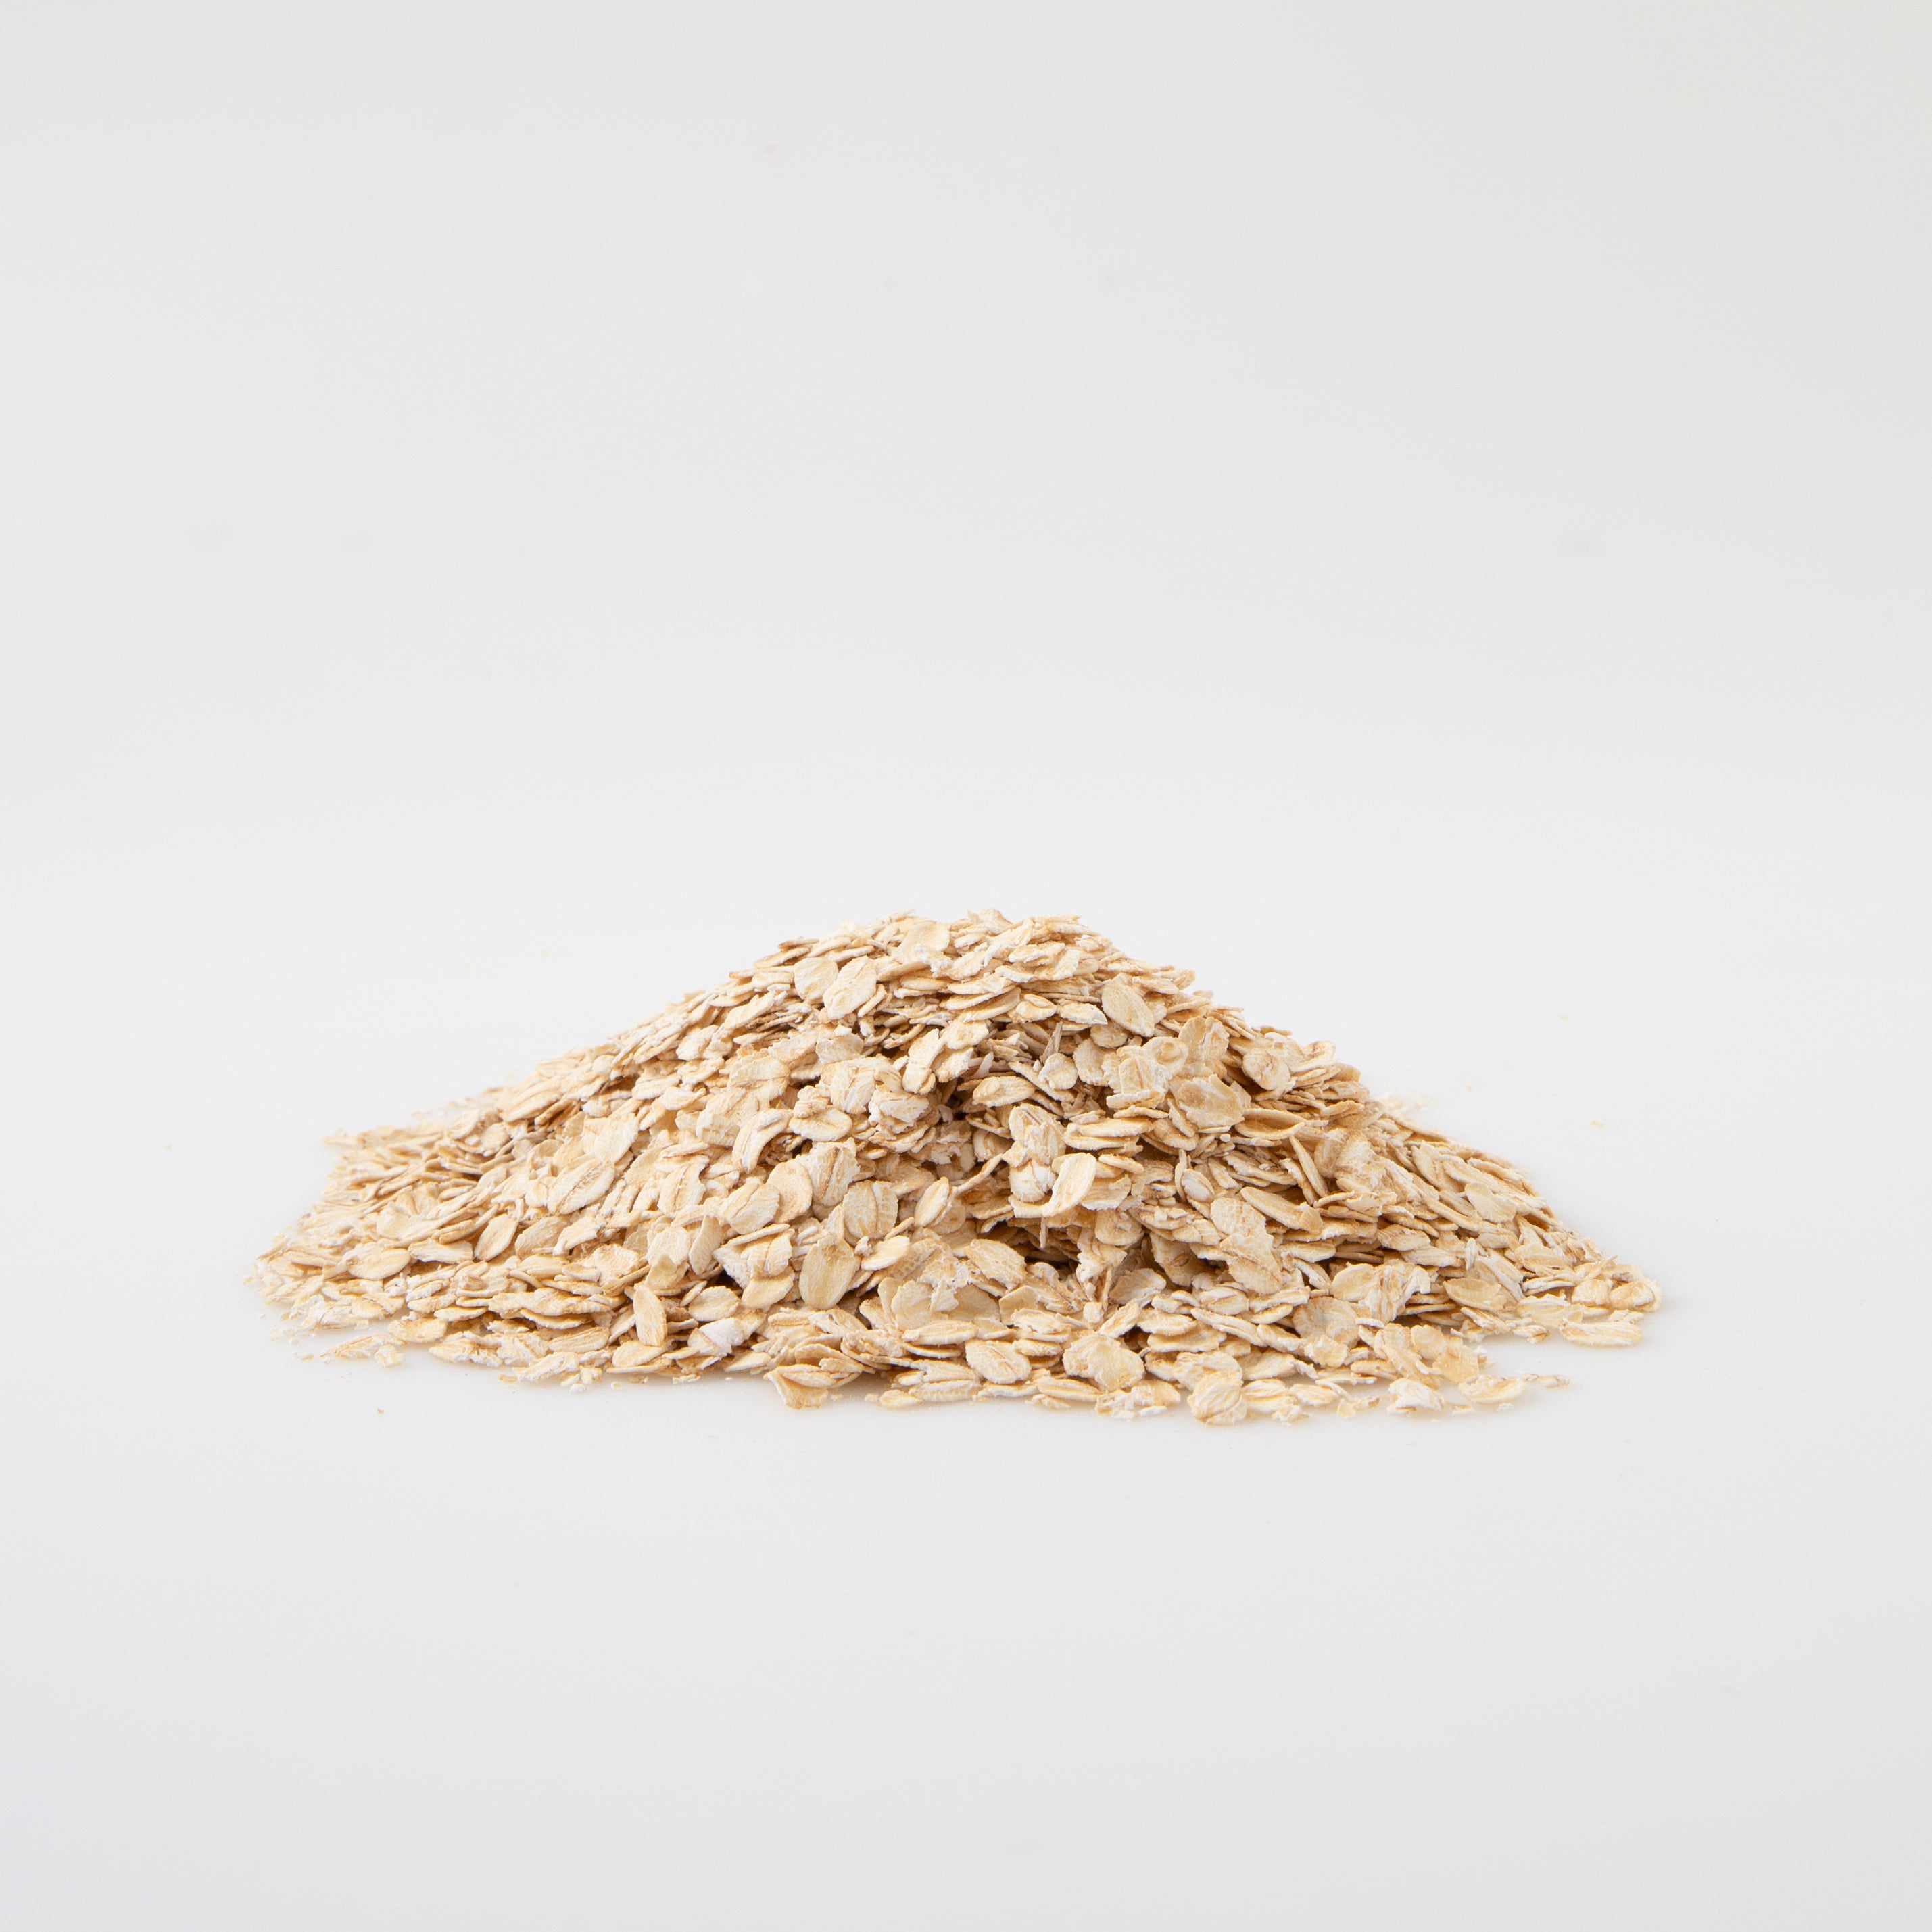 Organic Quick Oats (Cereals) Image 2 - Naked Foods